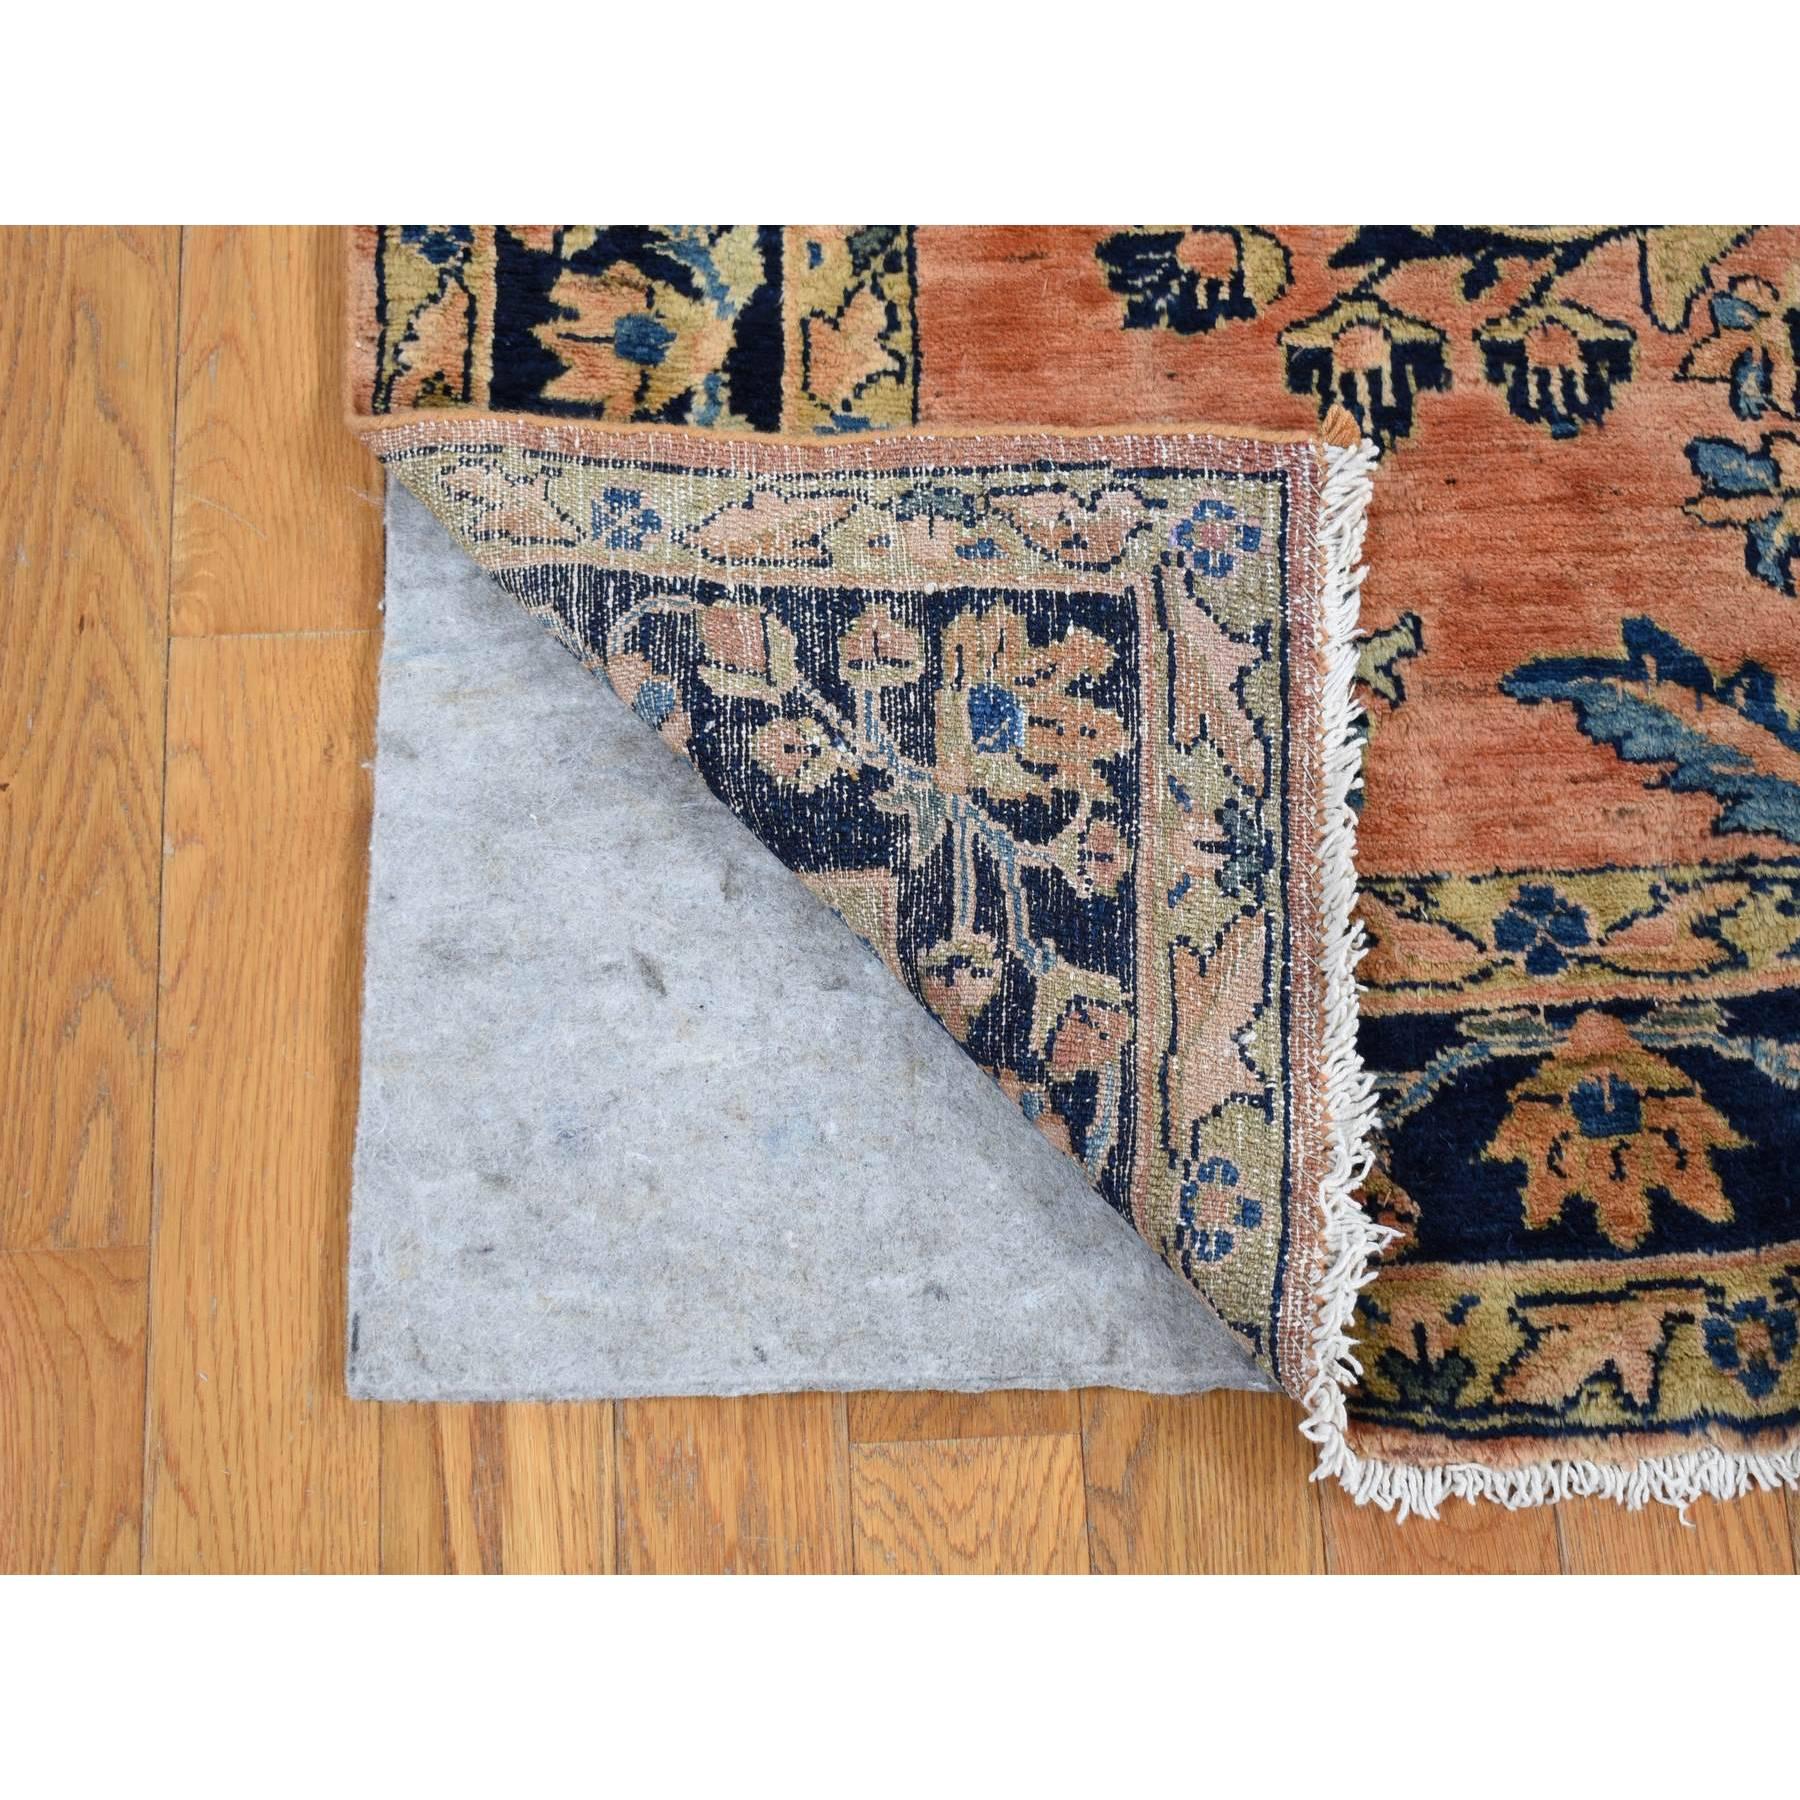 This fabulous hand-knotted carpet has been created and designed for extra strength and durability. This rug has been handcrafted for weeks in the traditional method that is used to make exact rug size in feet and inches : 4'9